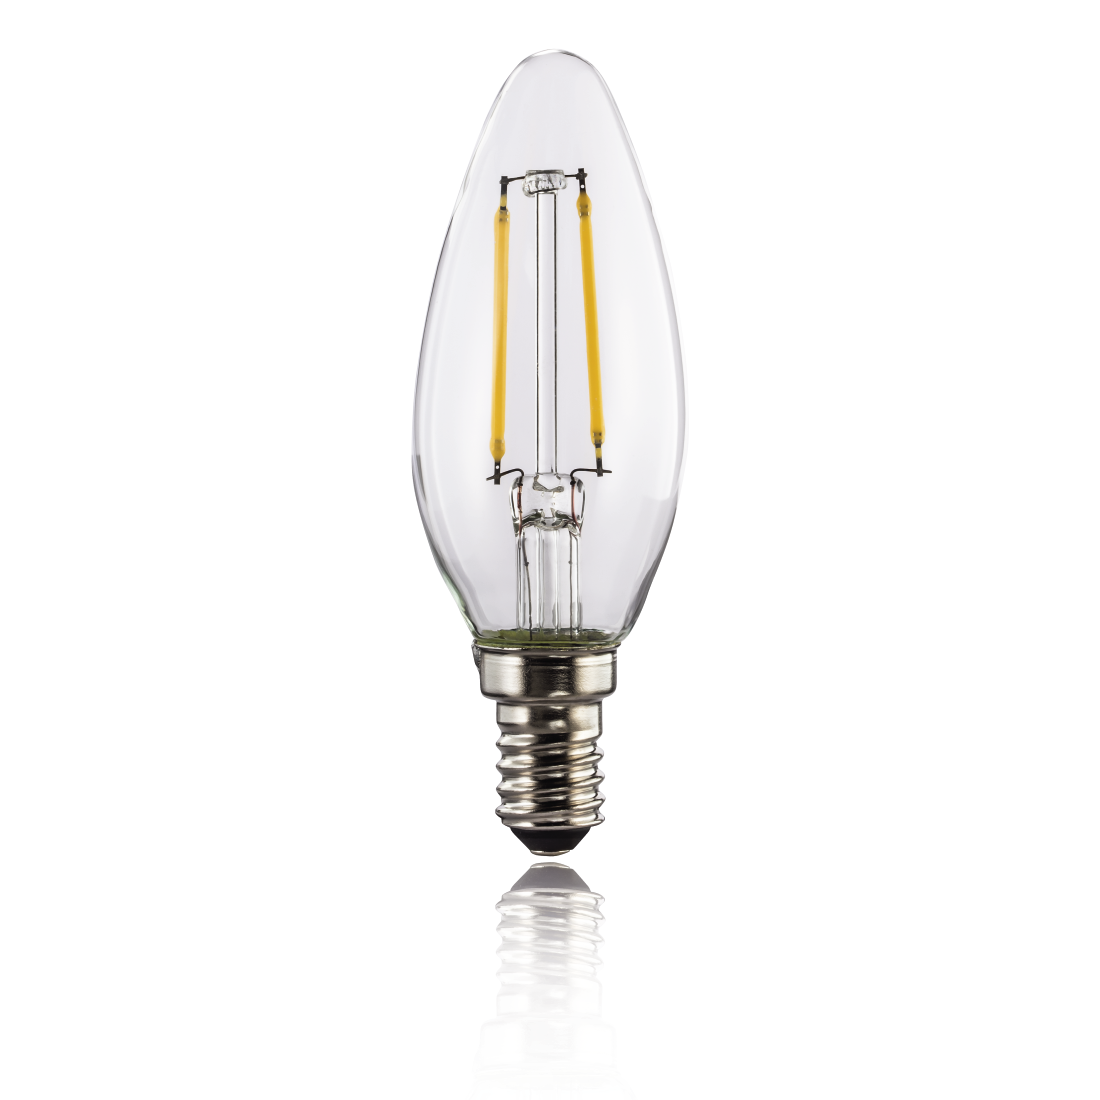 abx2 High-Res Image 2 - Xavax, LED Filament, E14, 250lm replaces 25W, candle bulb, warm white